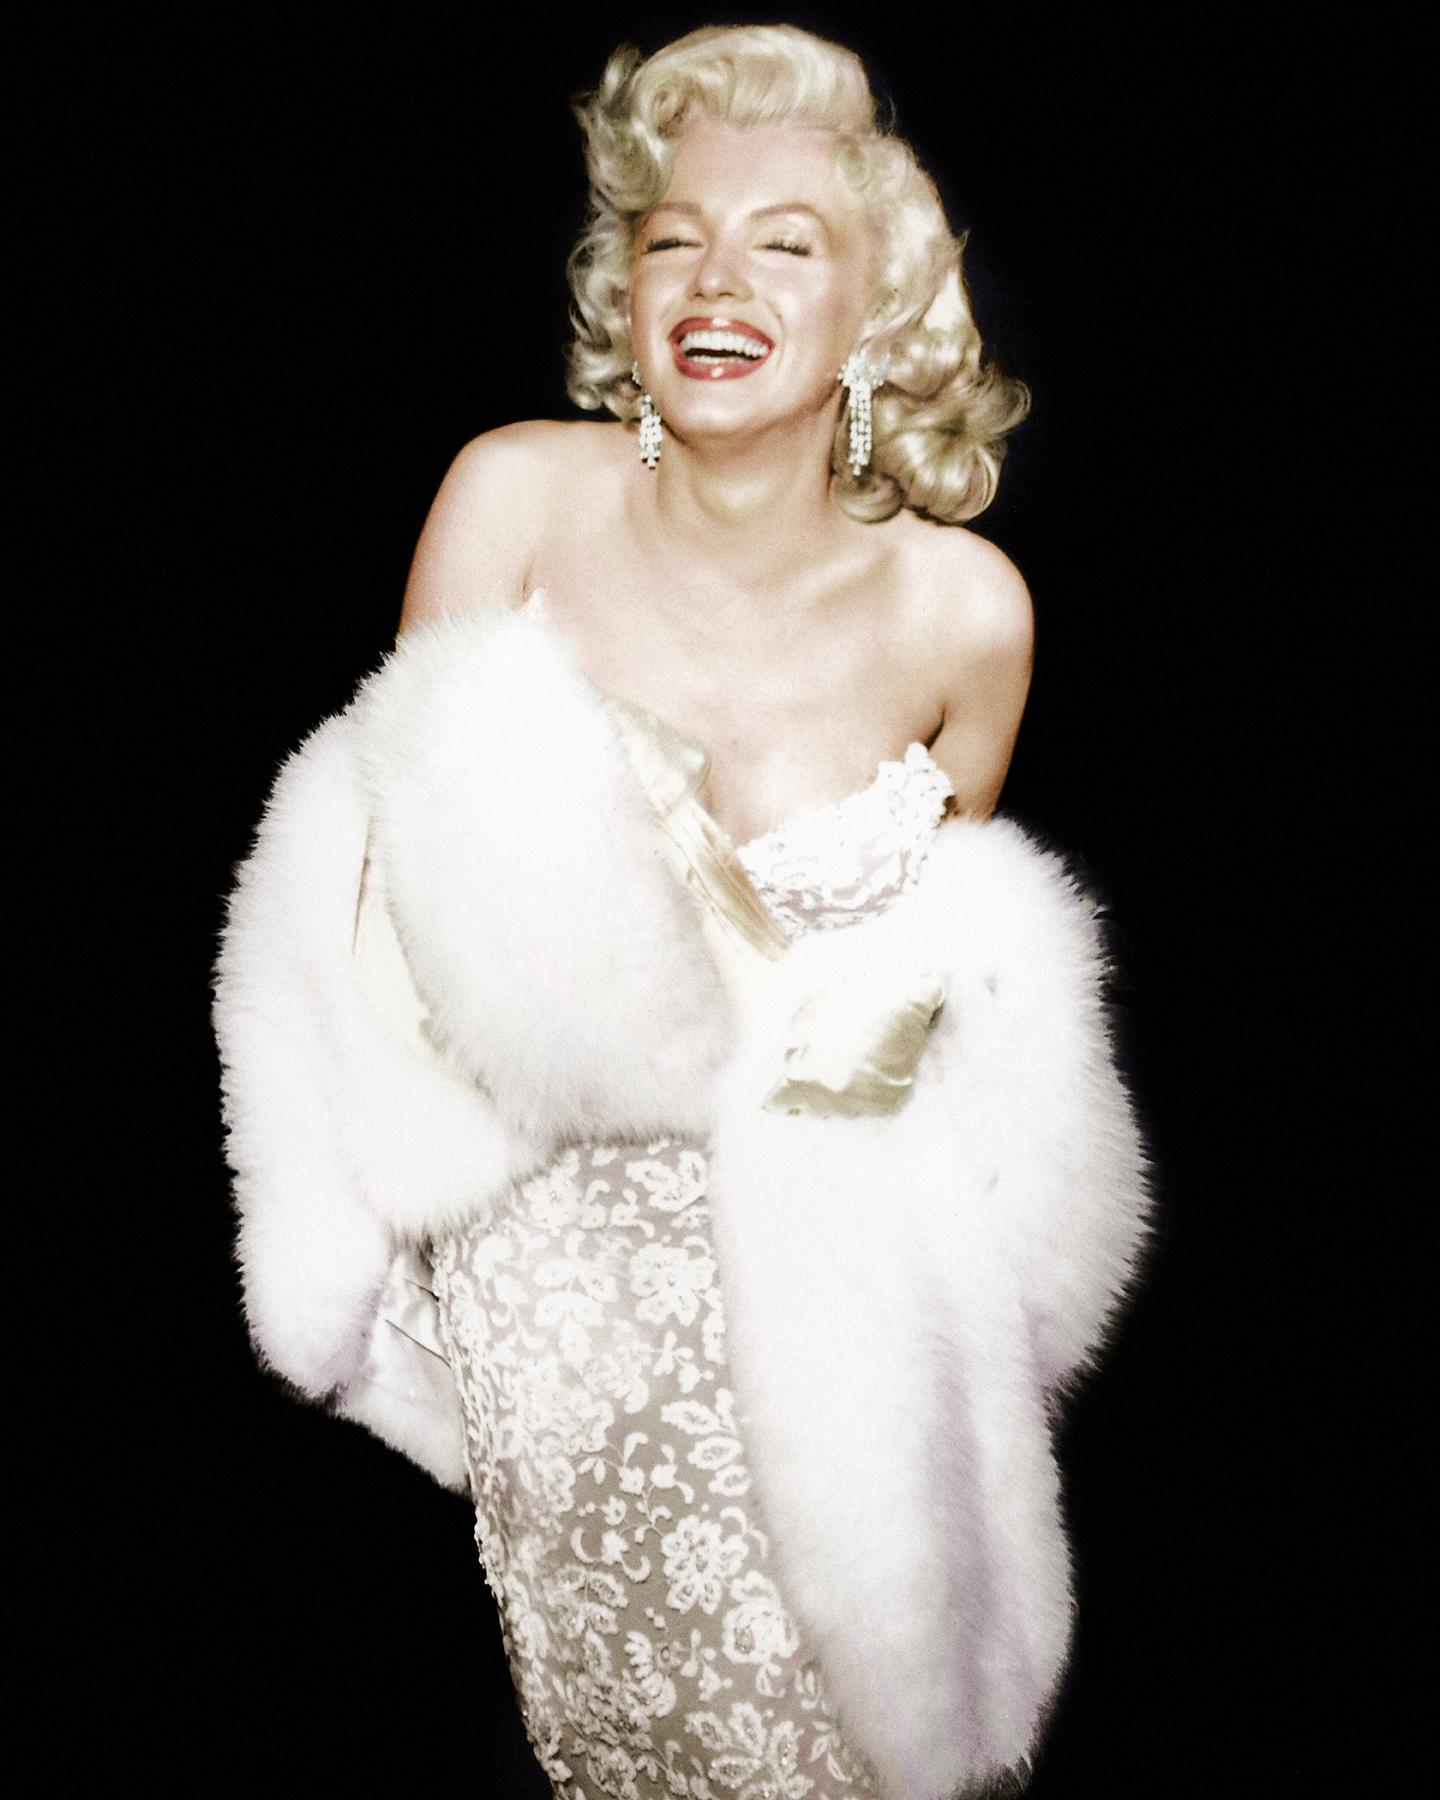 Frank Worth Color Photograph - Marilyn Monroe Smiling in Fur